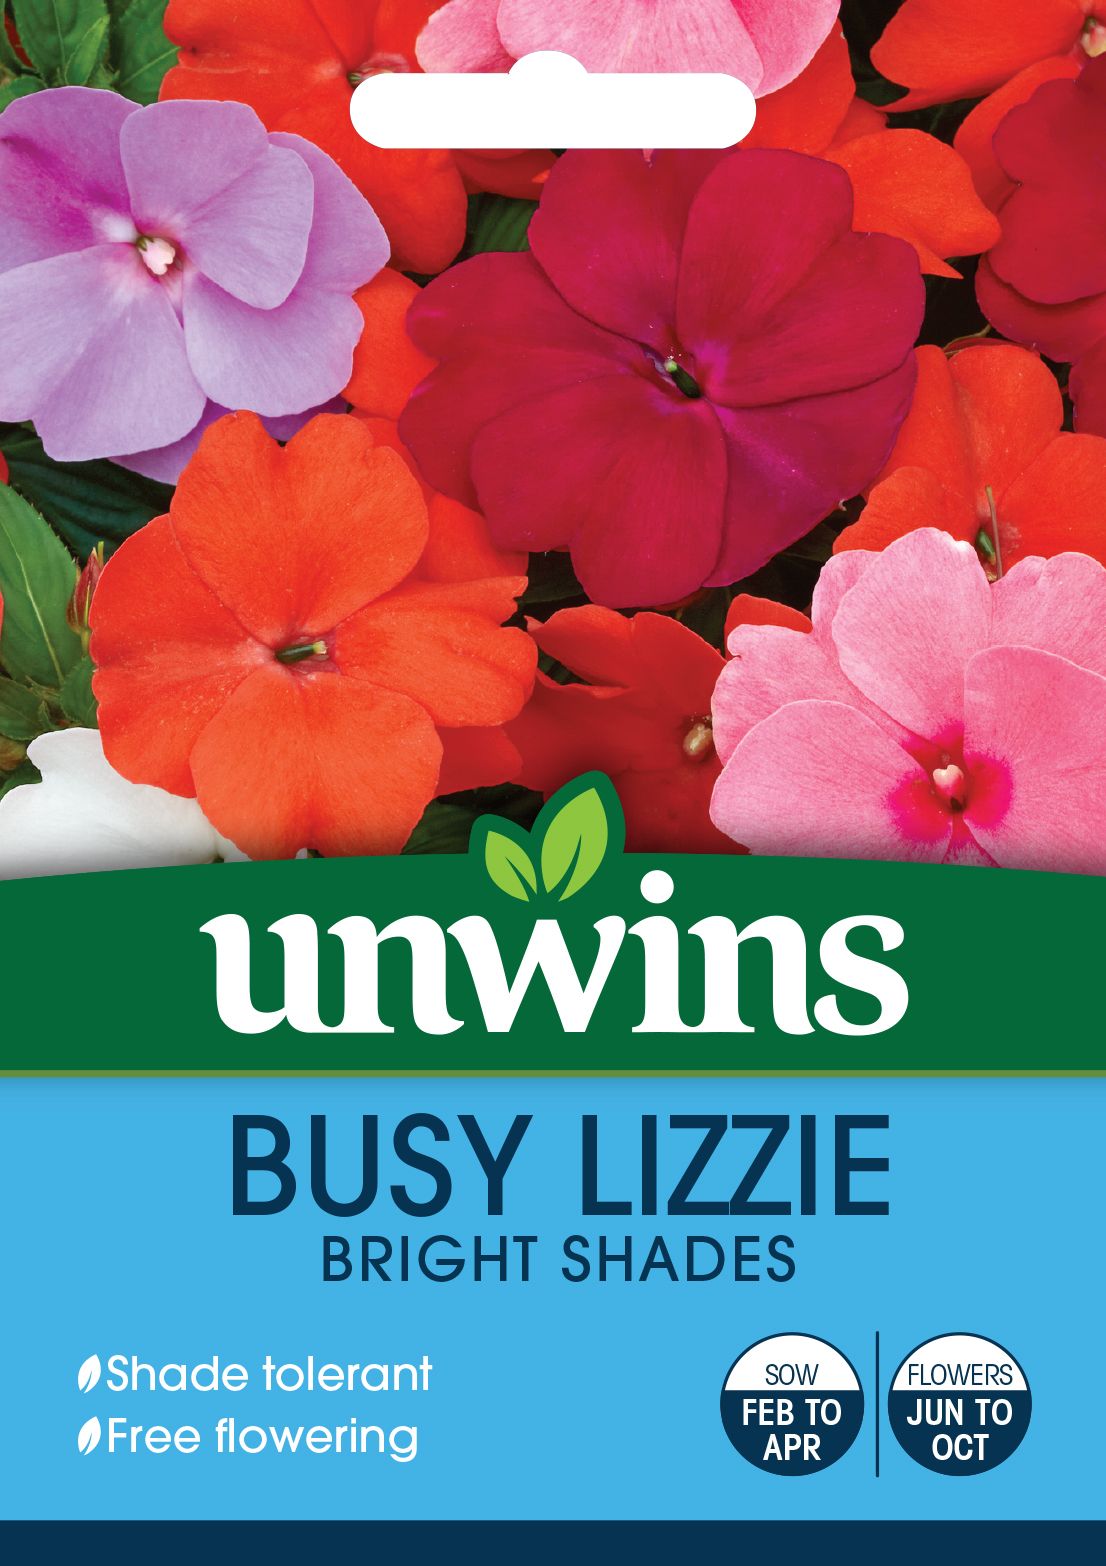 Busy Lizzie Bright Shades